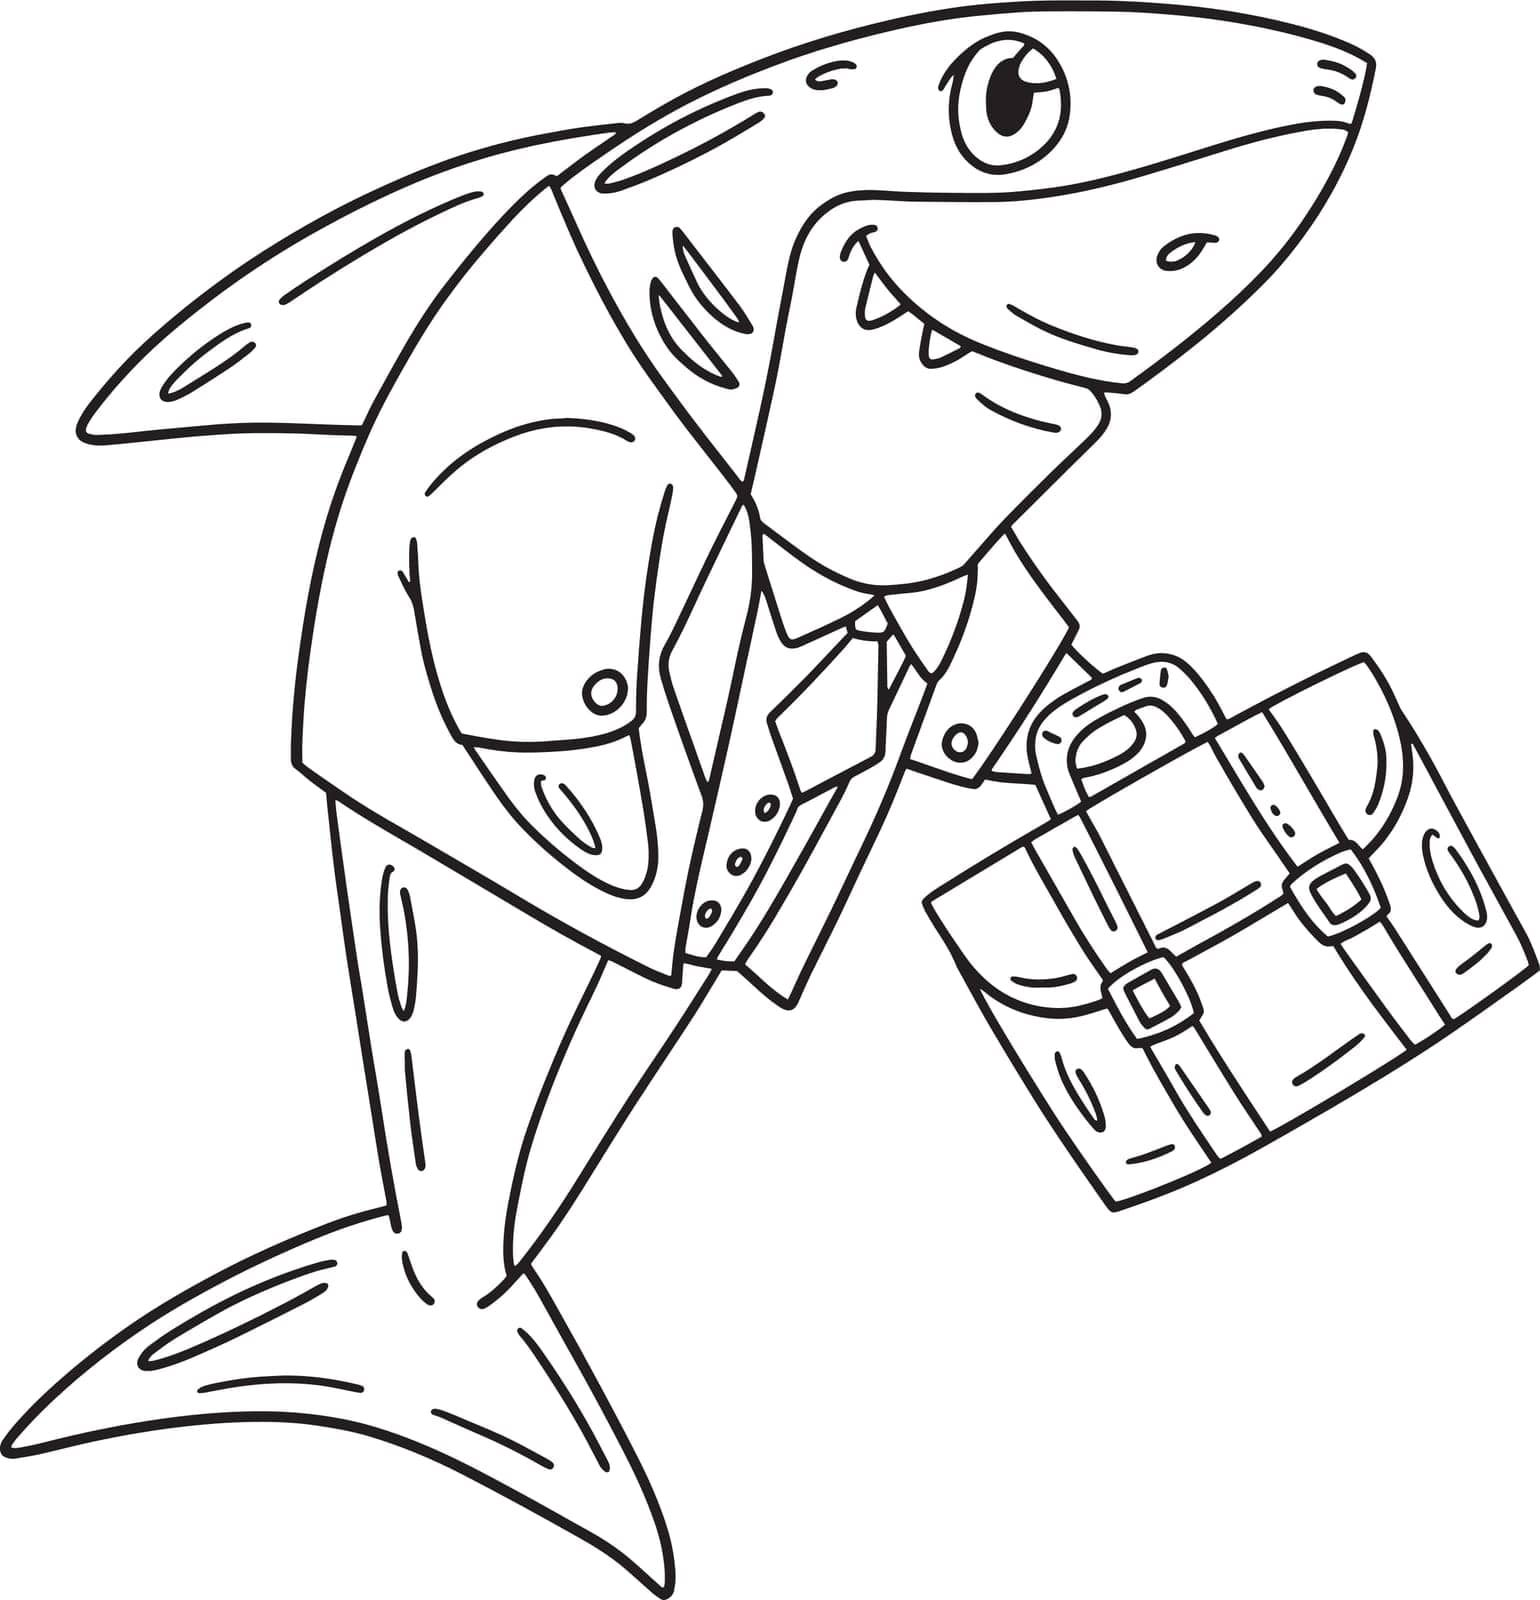 Shark in a Business Suit Isolated Coloring Page by abbydesign